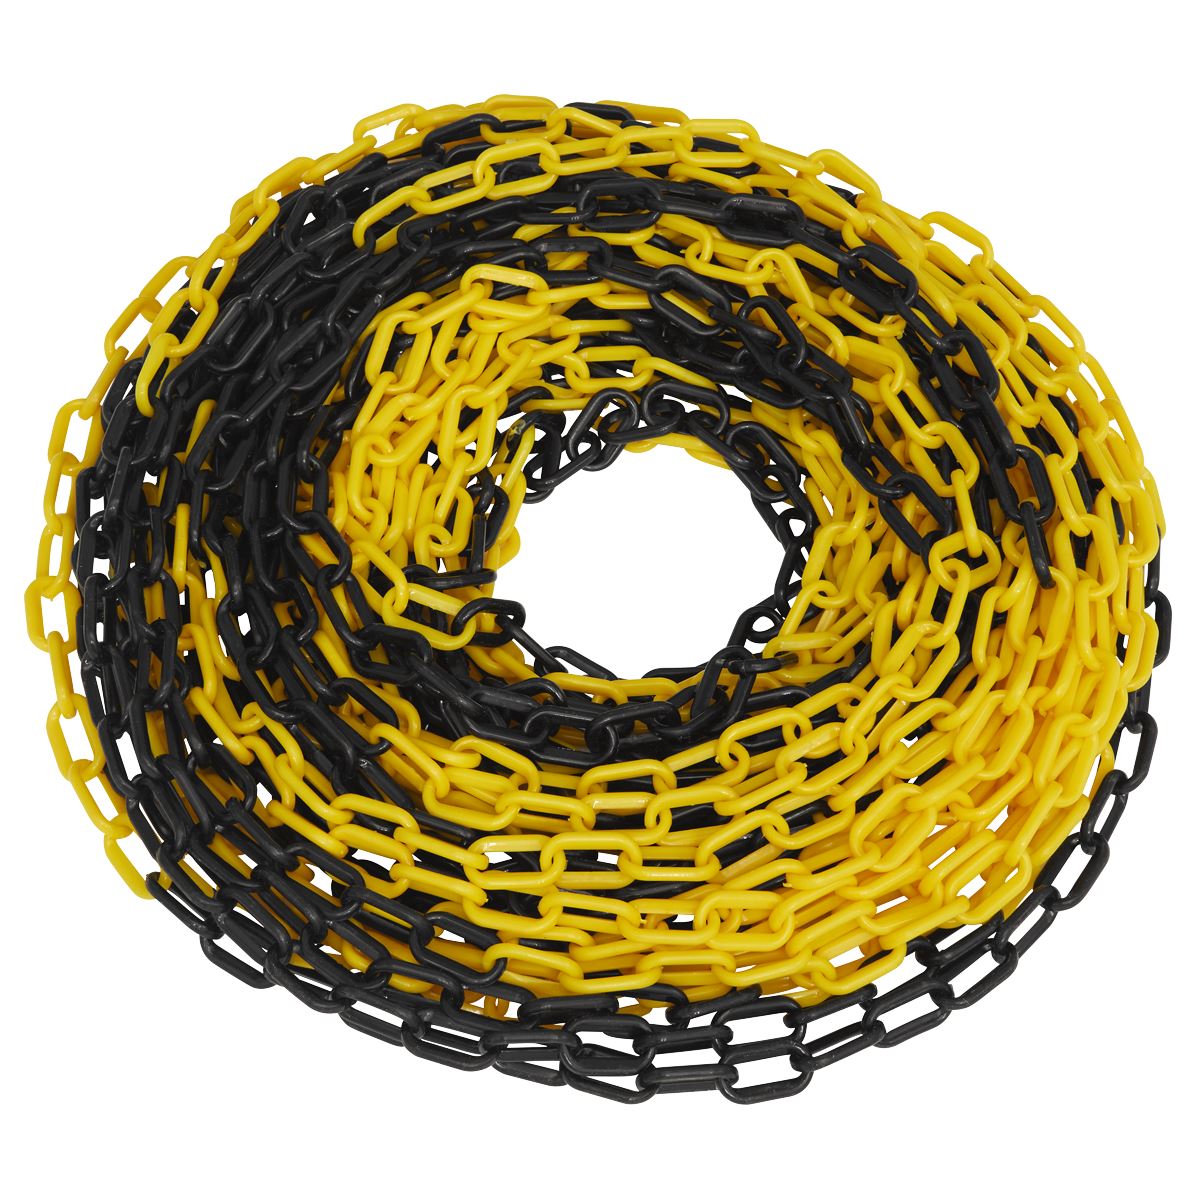 Sealey Safety Chain Black/Yellow 25m x 6mm